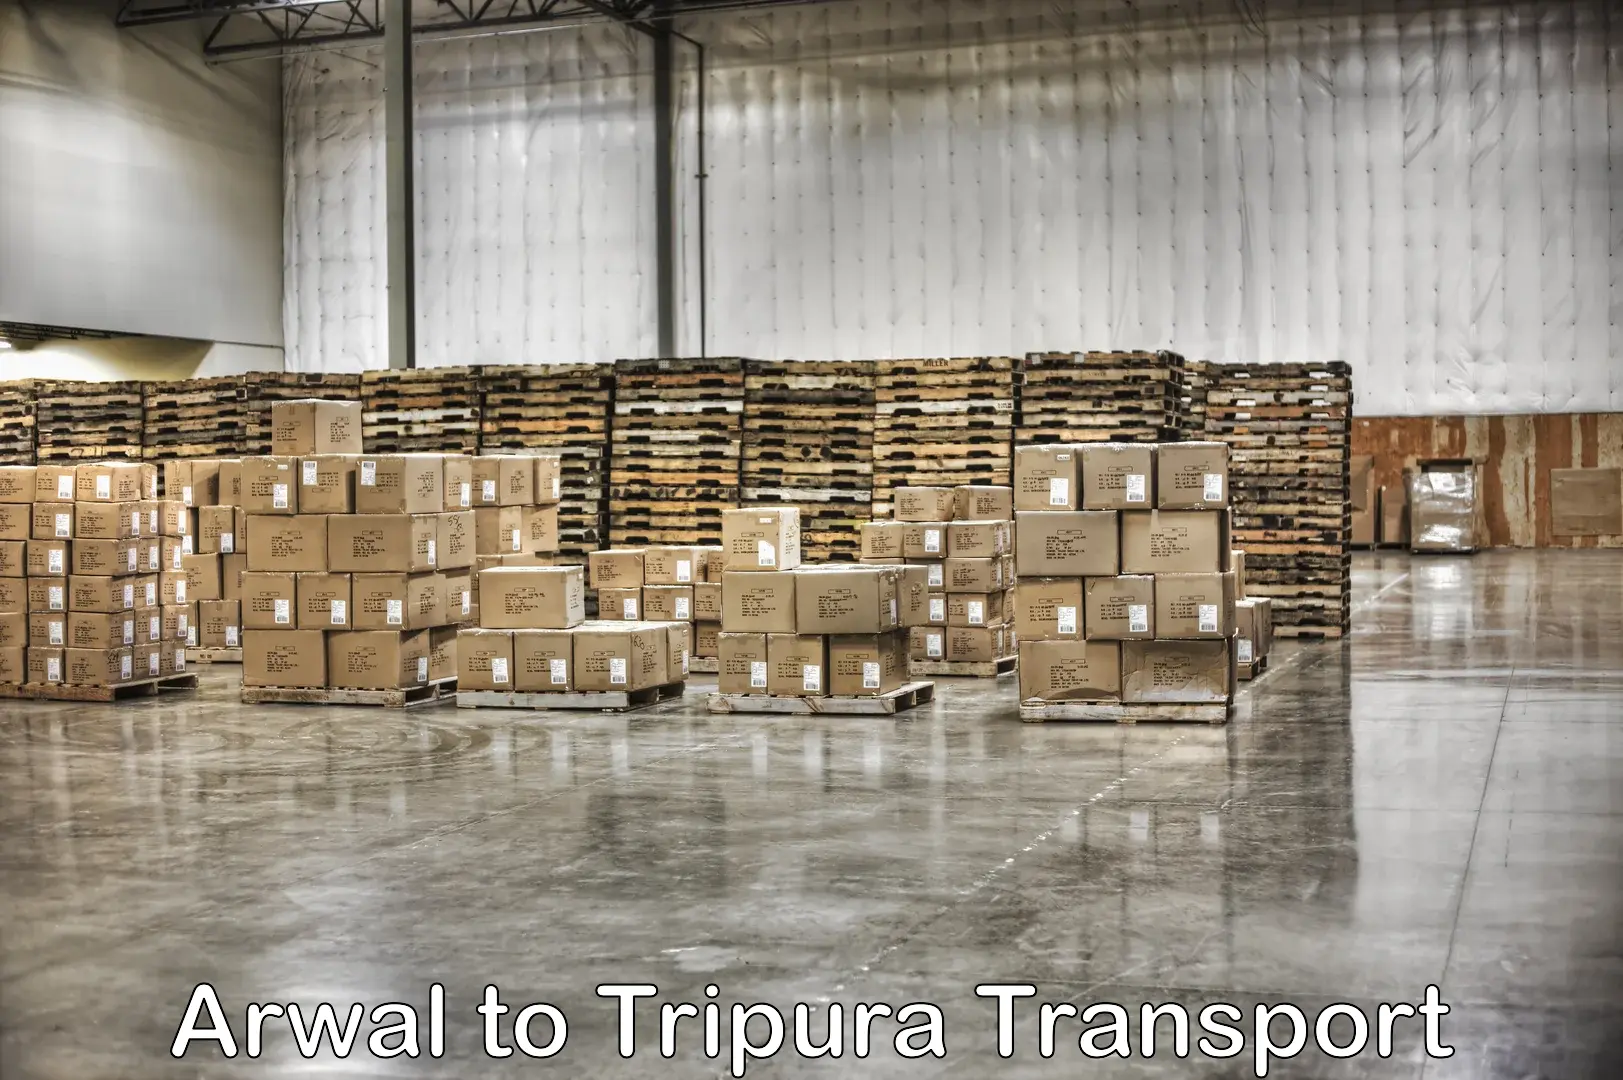 Truck transport companies in India Arwal to Udaipur Tripura